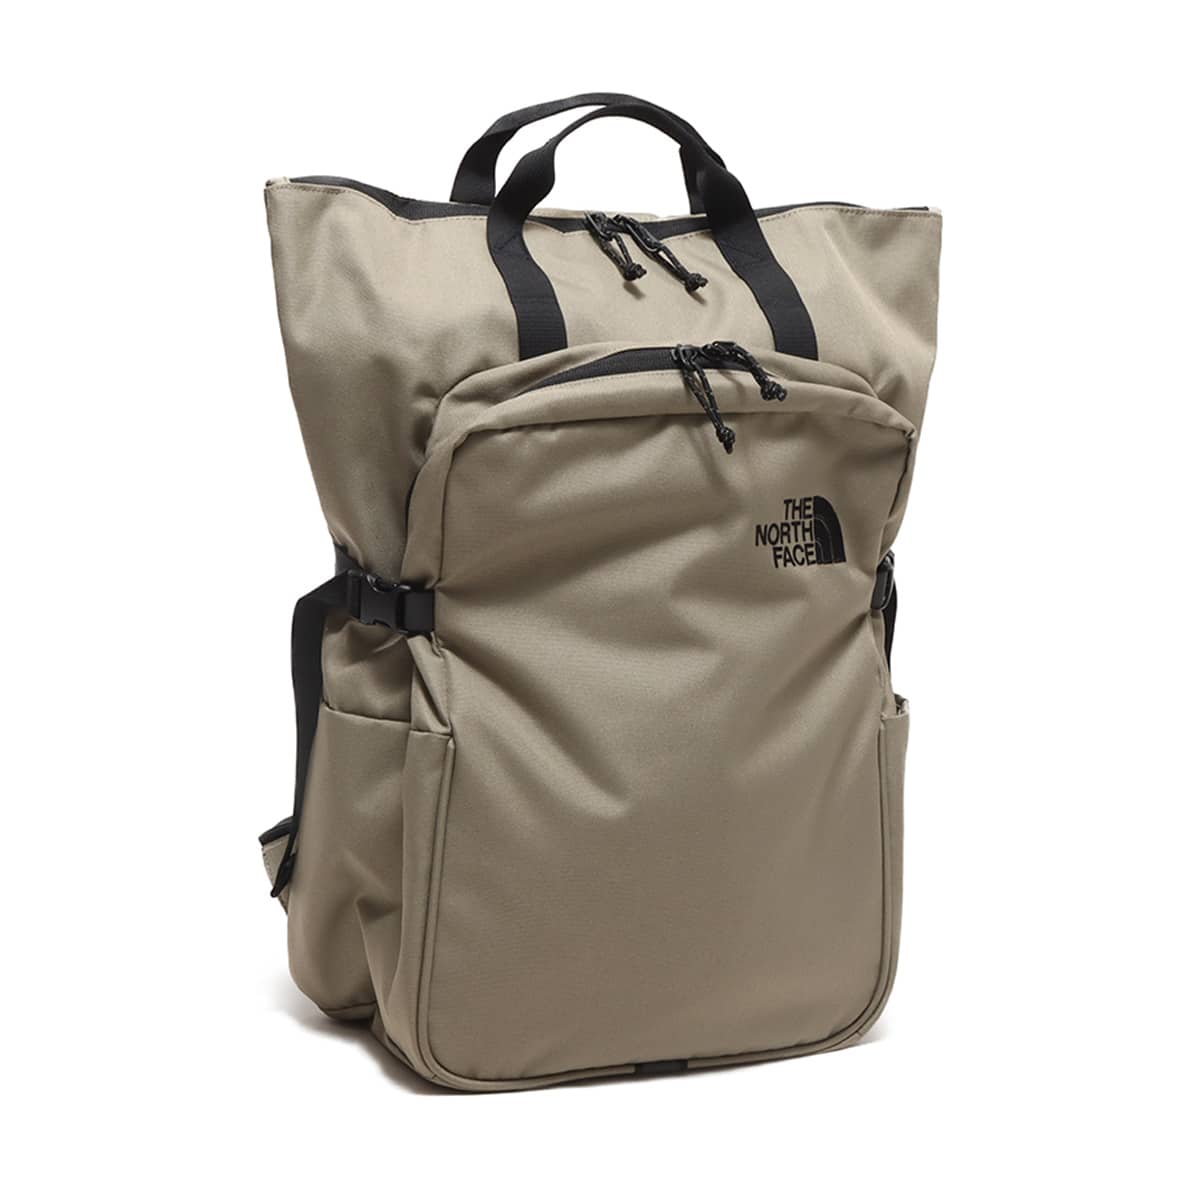 THE NORTH FACE BOULDER TOTE PACK Fロック 23FW-I